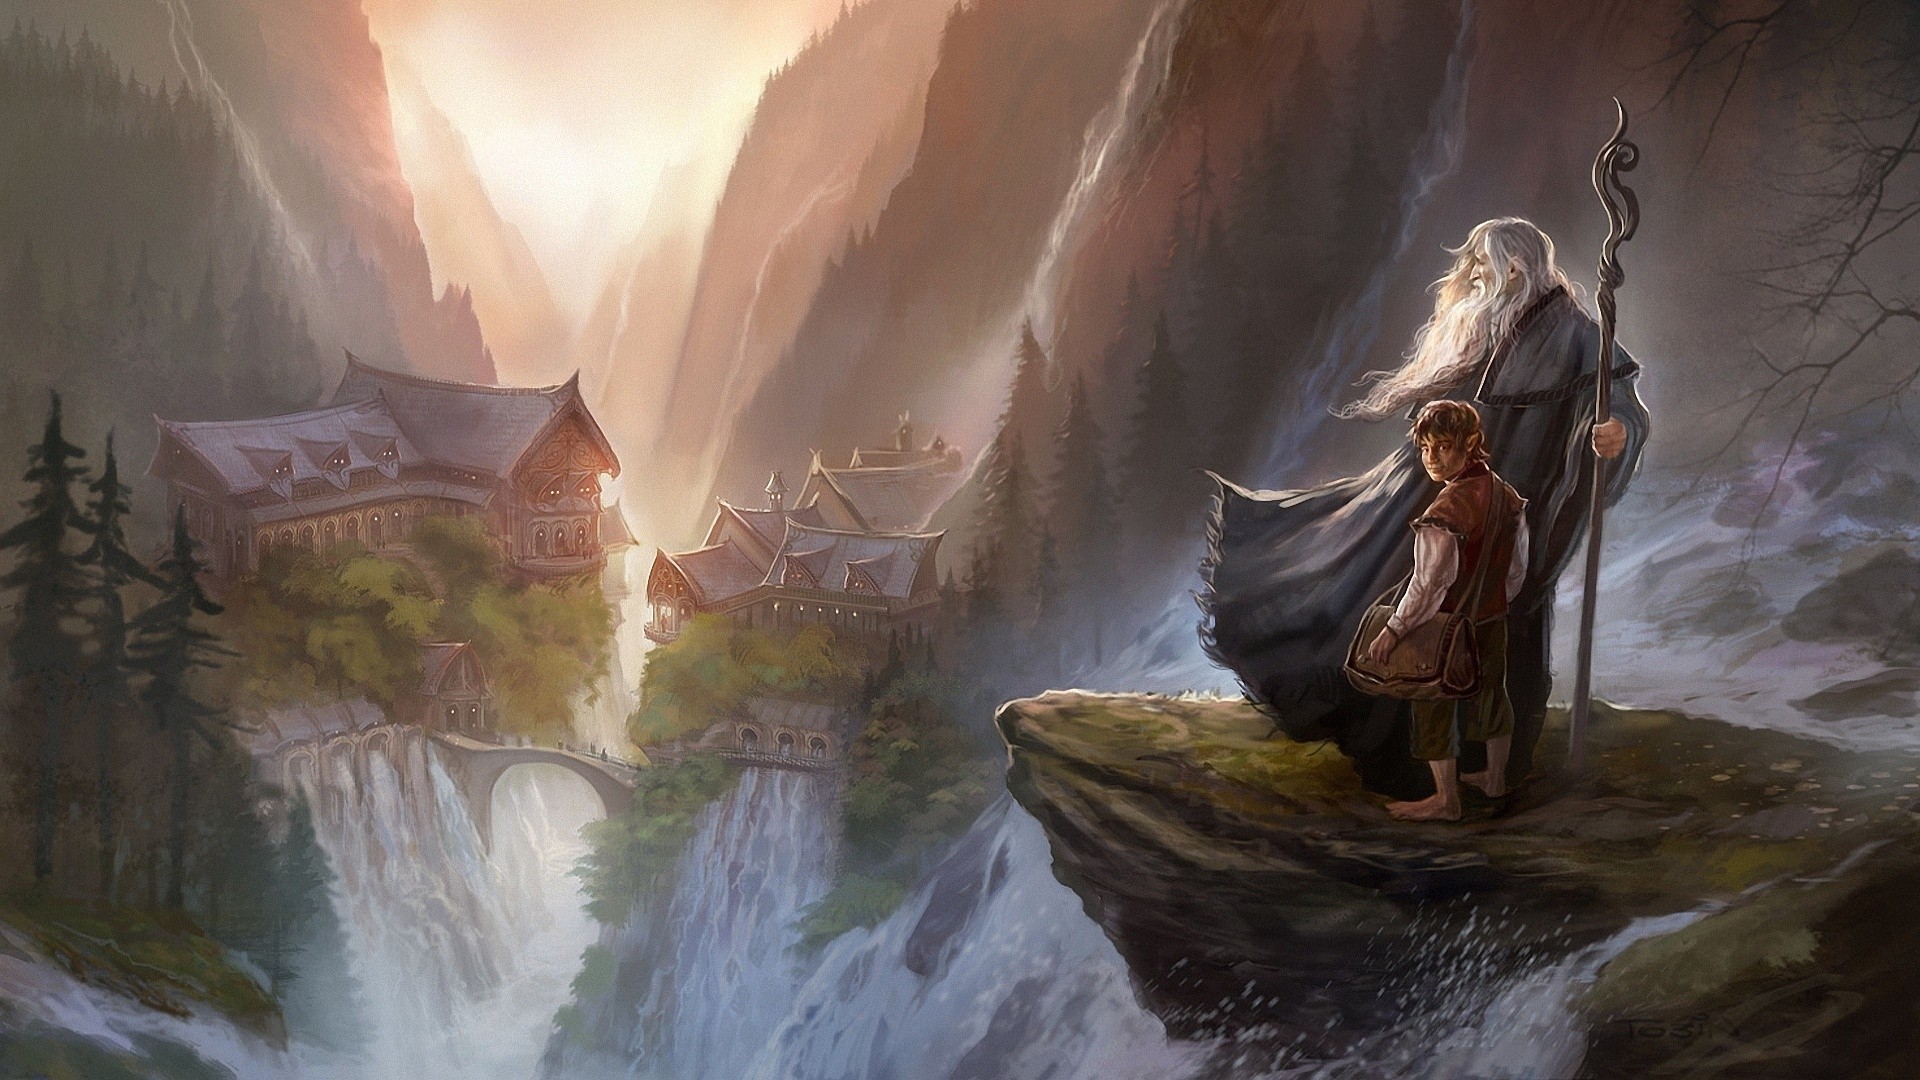 The Lord Of The Rings Gandalf The Hobbit Rivendell Fantasy Art Movies Bilbo Baggins 1920x1080